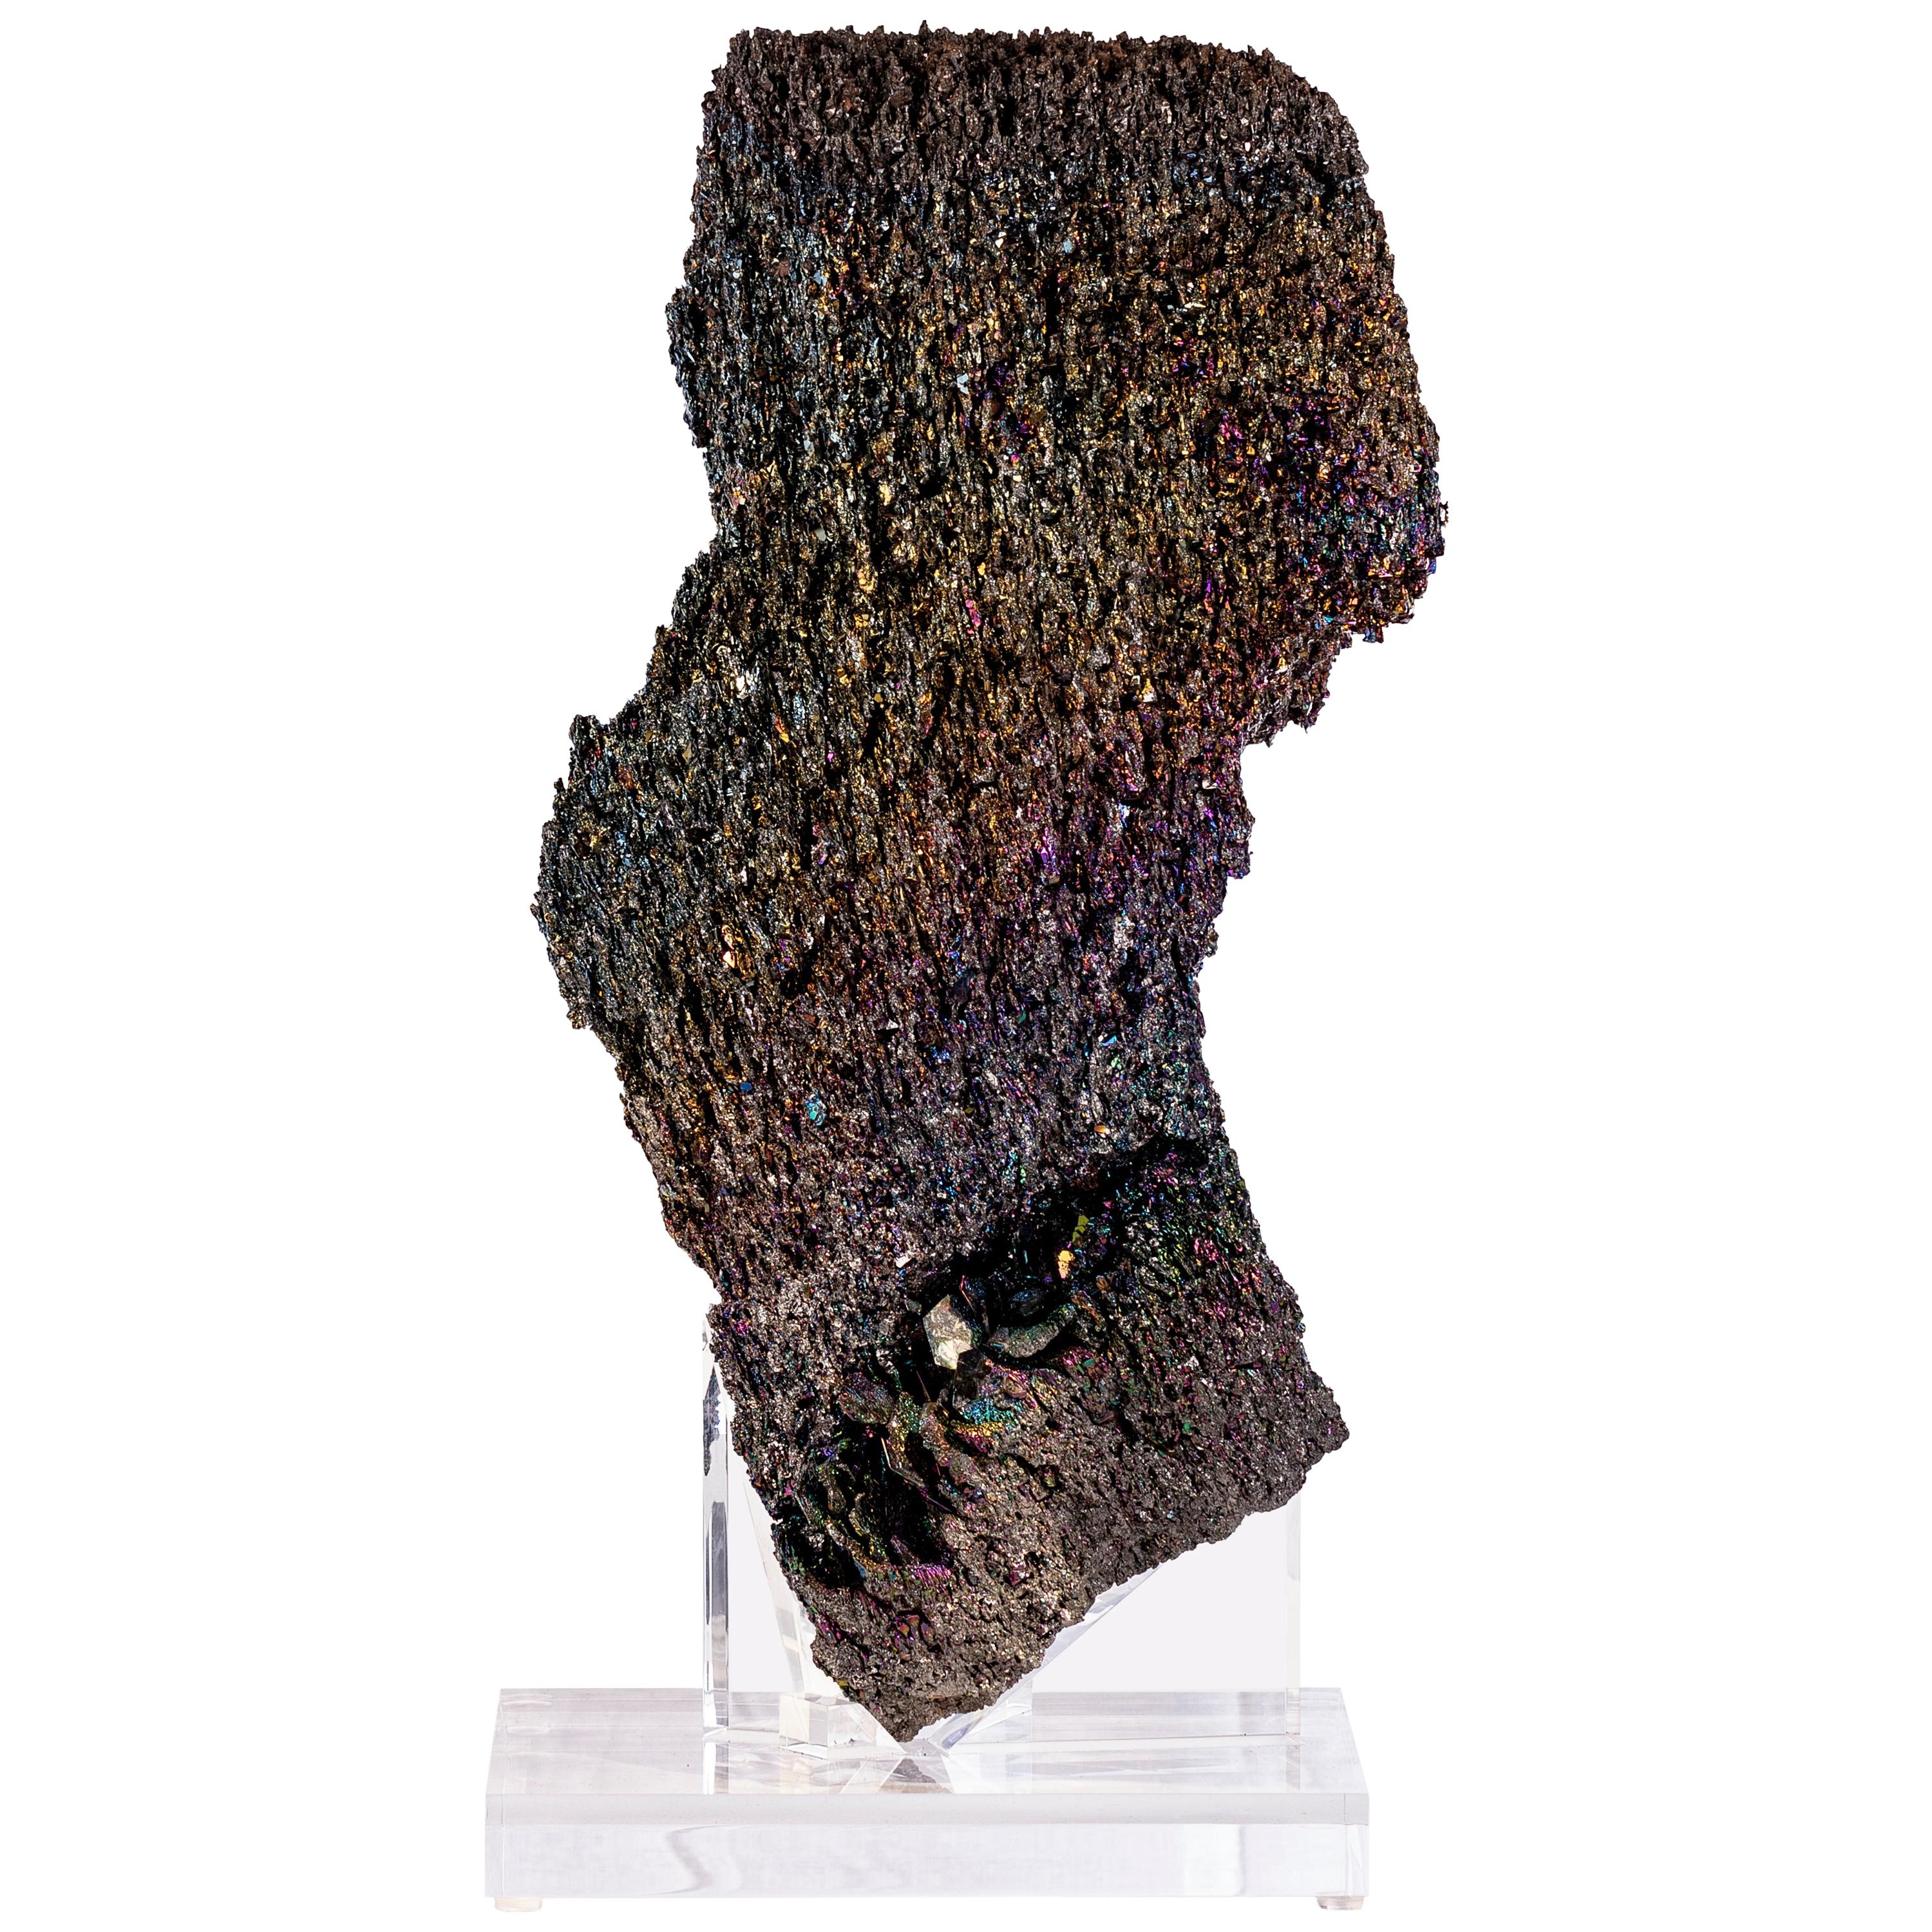 Natural Colorful Sculpture Silicon Carbide Mineral in Acrylic Base